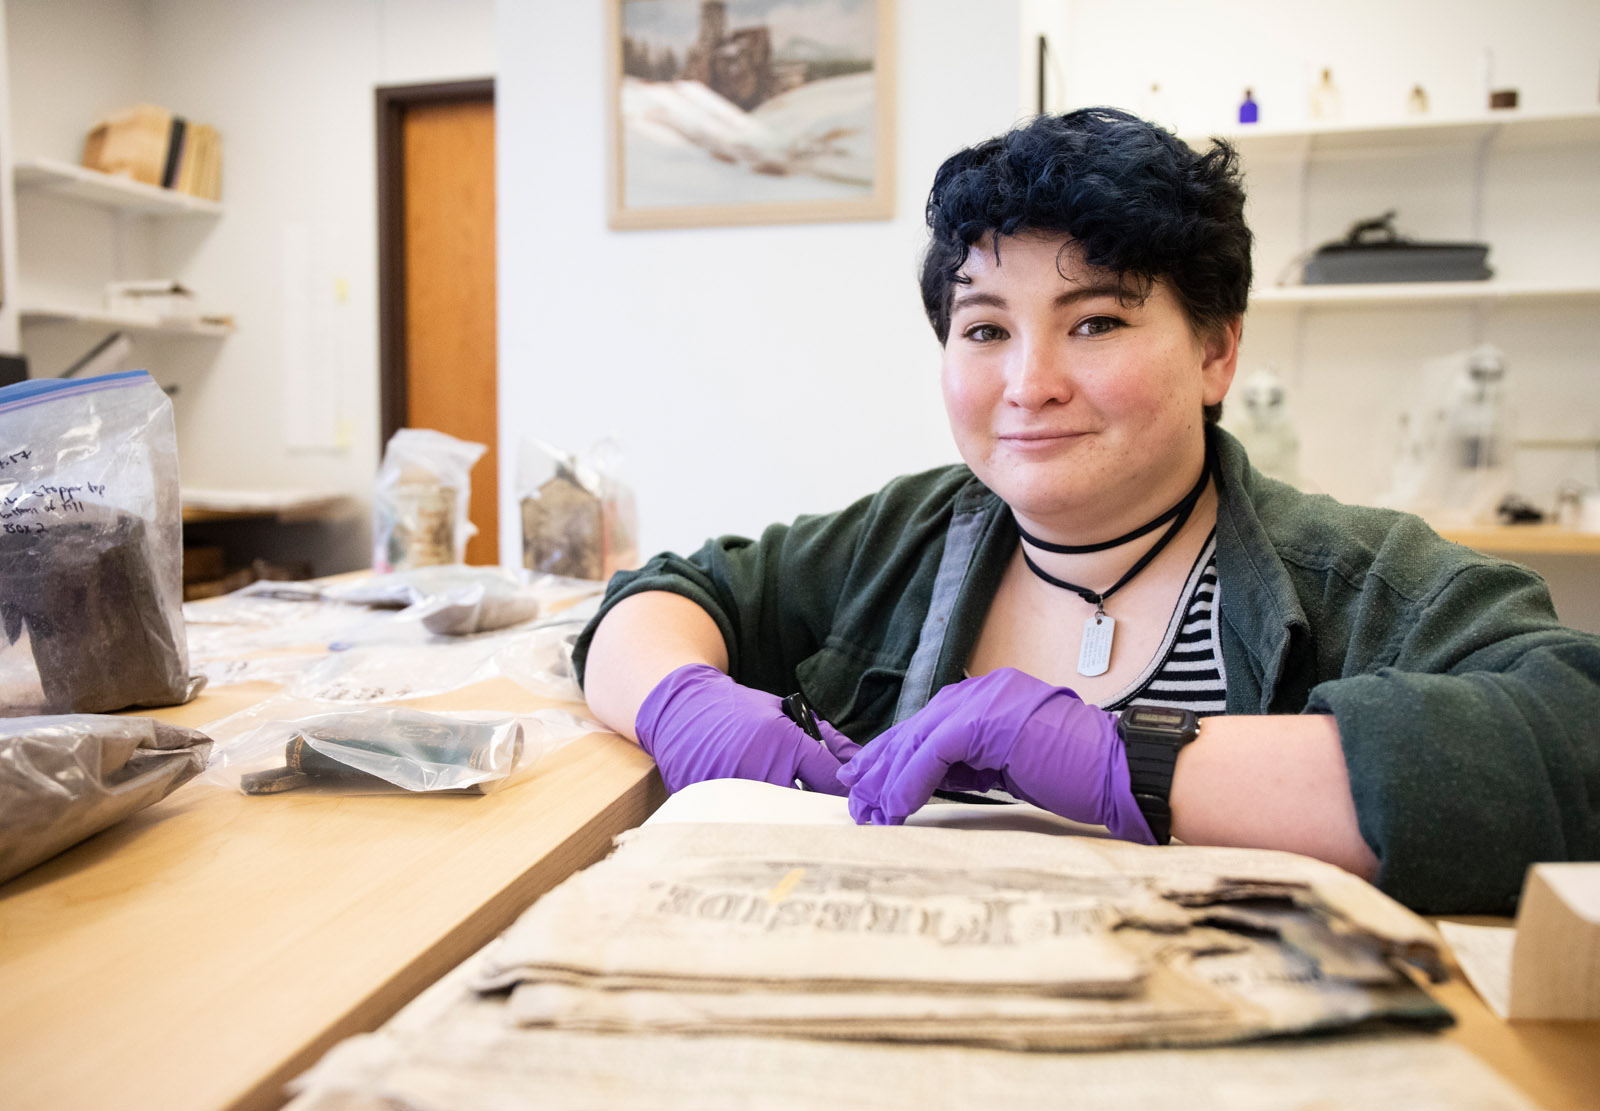 Ella Axelrod has spent months investigating, cataloging and digging into the mysteries of a buried box of odd treasures from the late 1800s and early 1900s as a part of their Summer Collaborative Research.